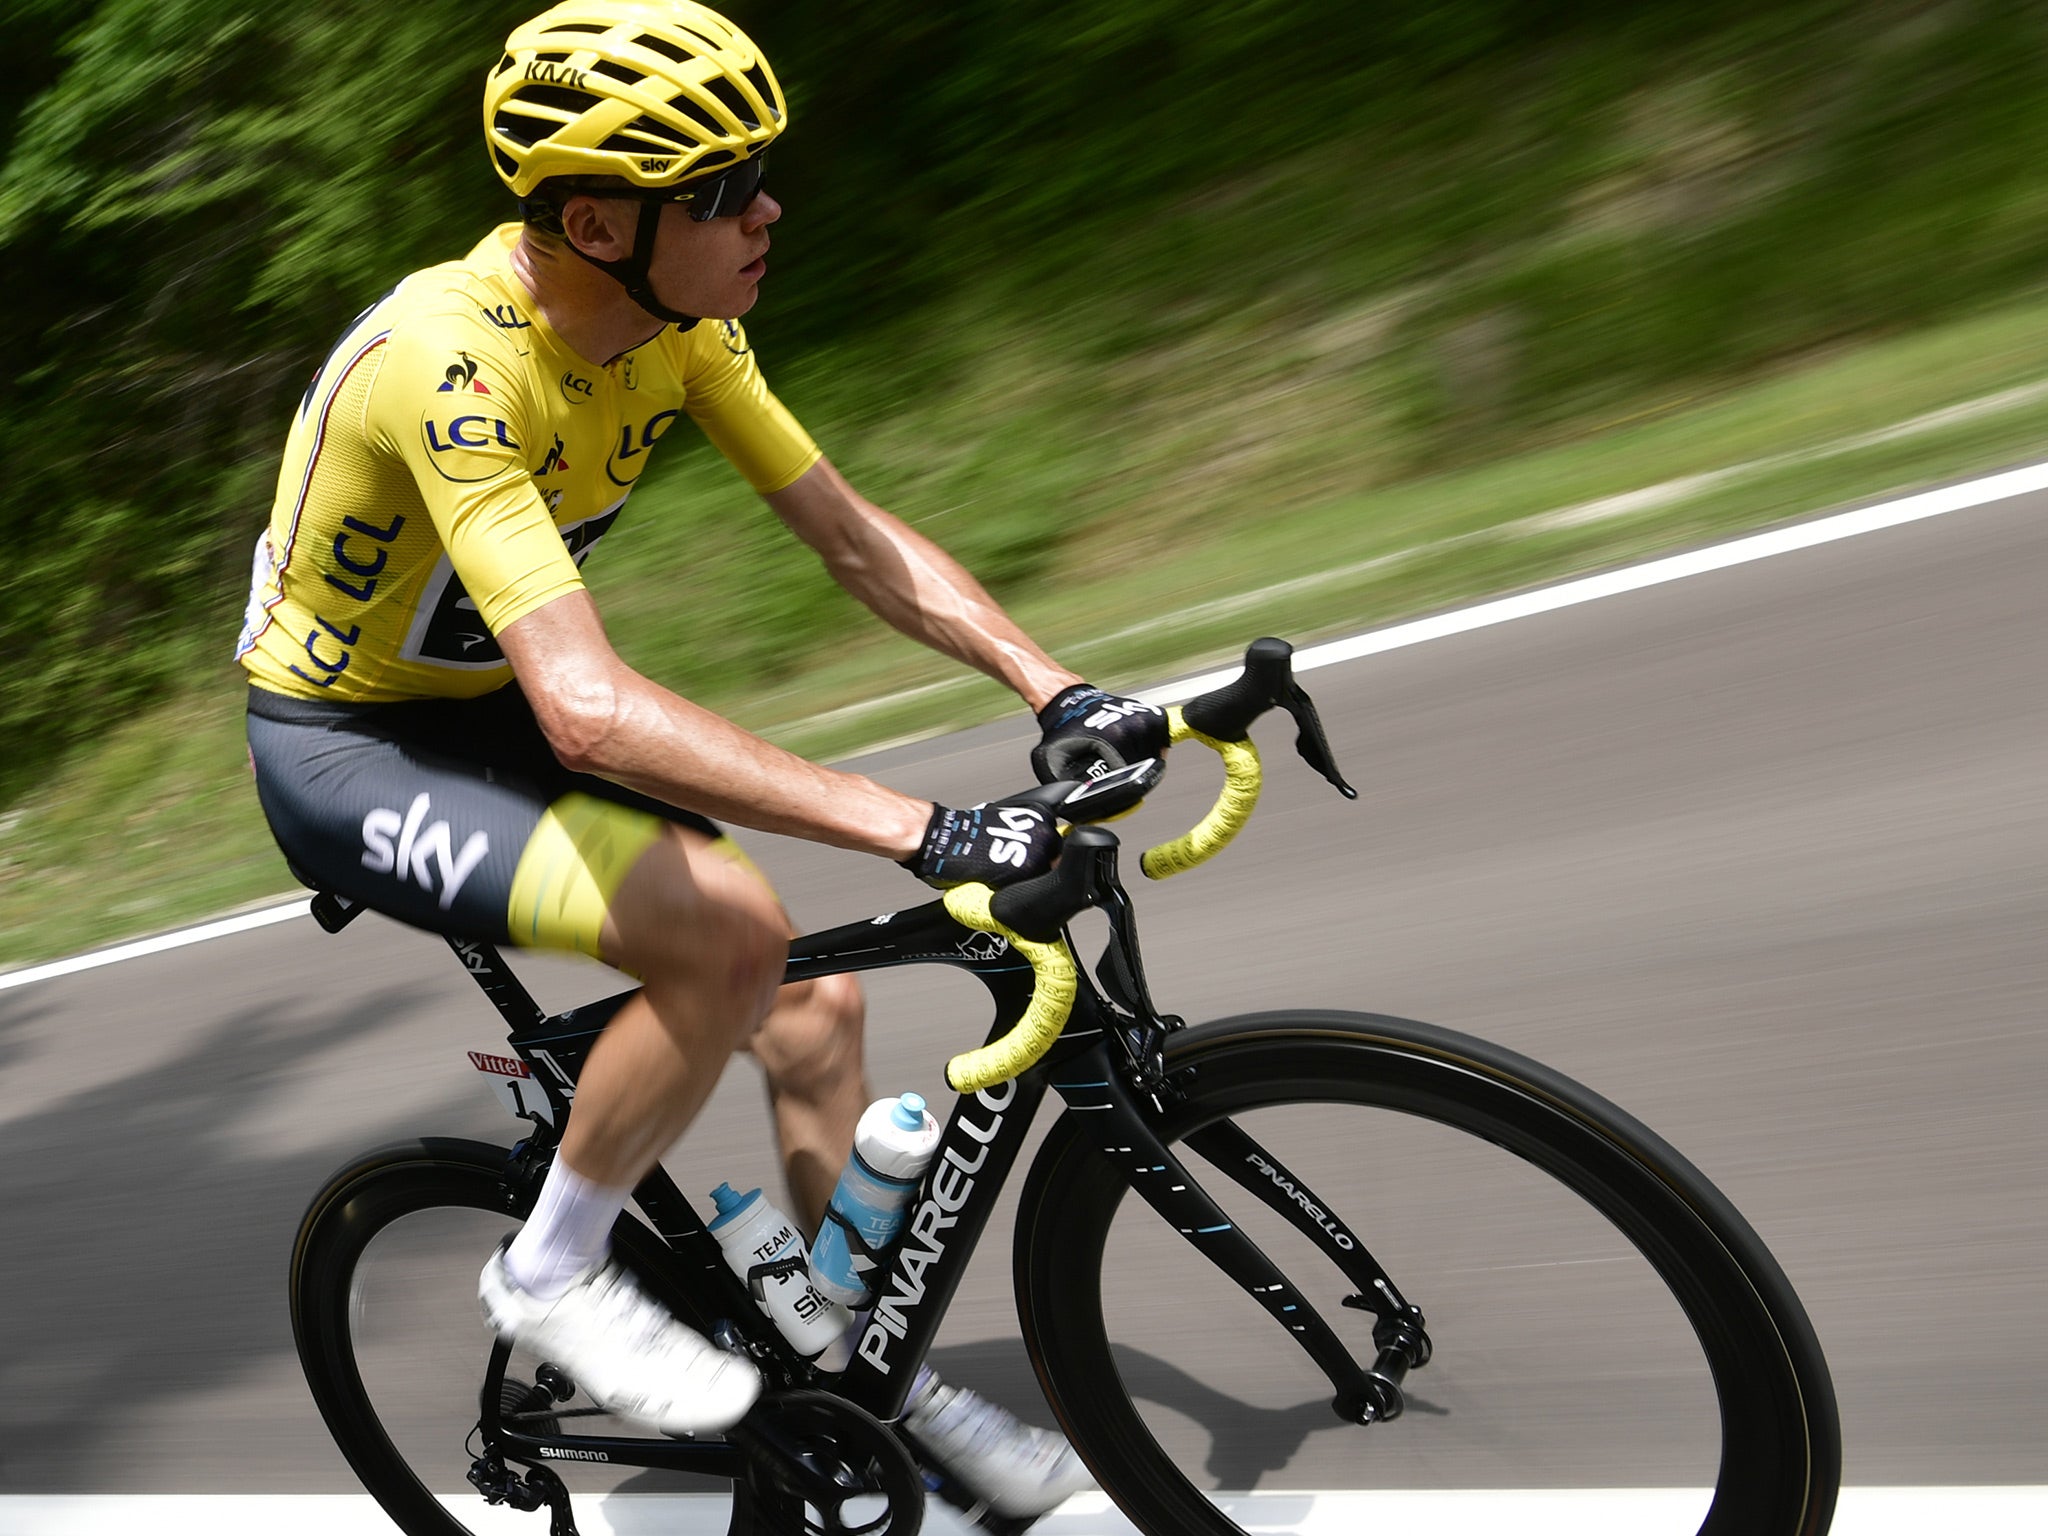 Chris Froome faces a long and arduous weekend of climbs that may define his Tour